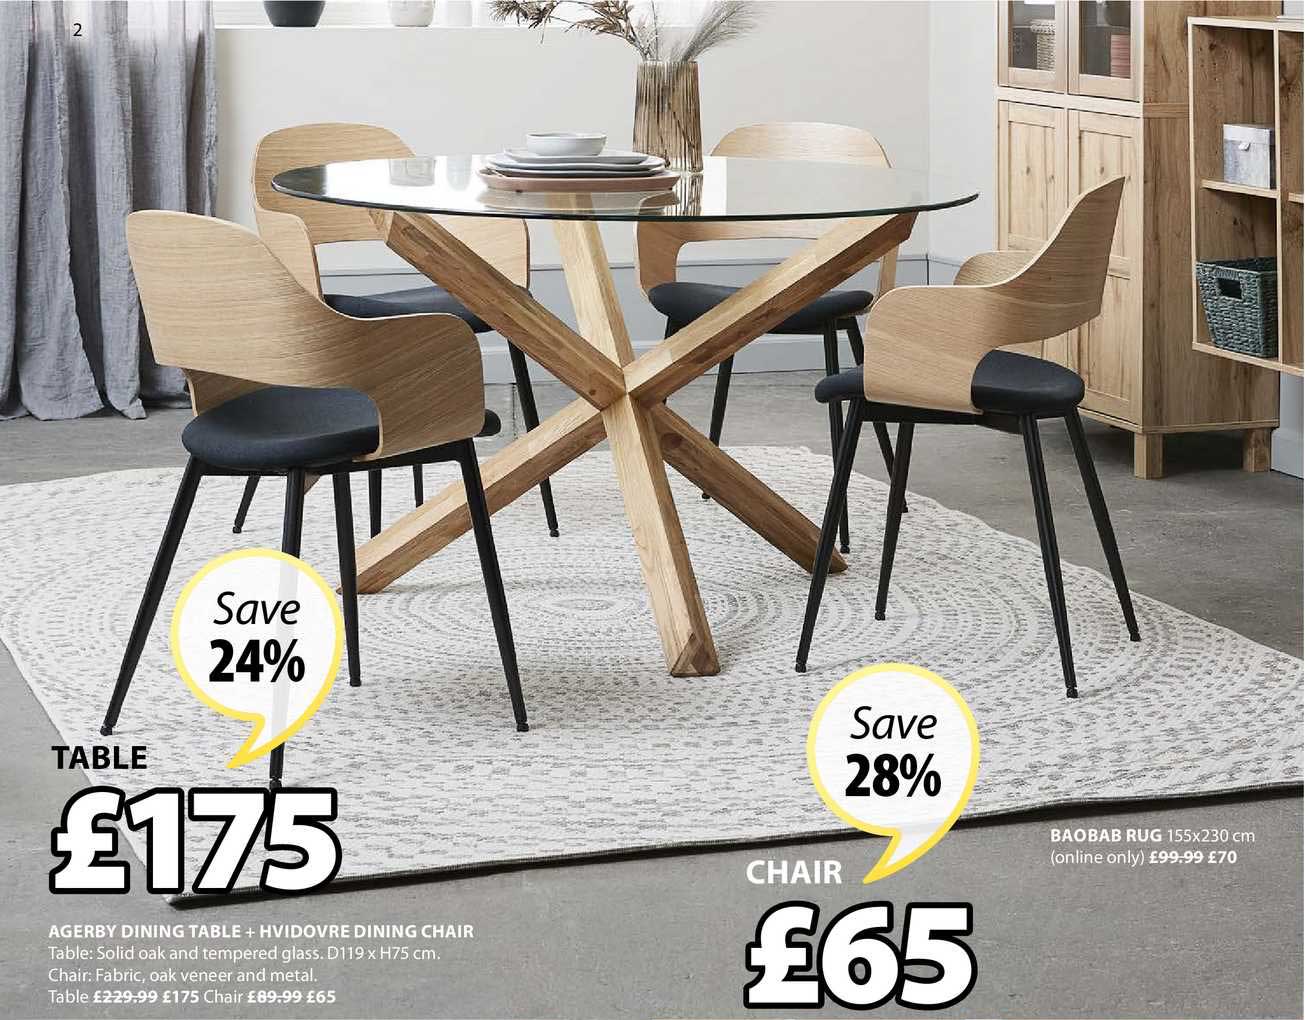 JYSK Agerby Dining Table + Hvidovre Dining Chair , Baobab Rug